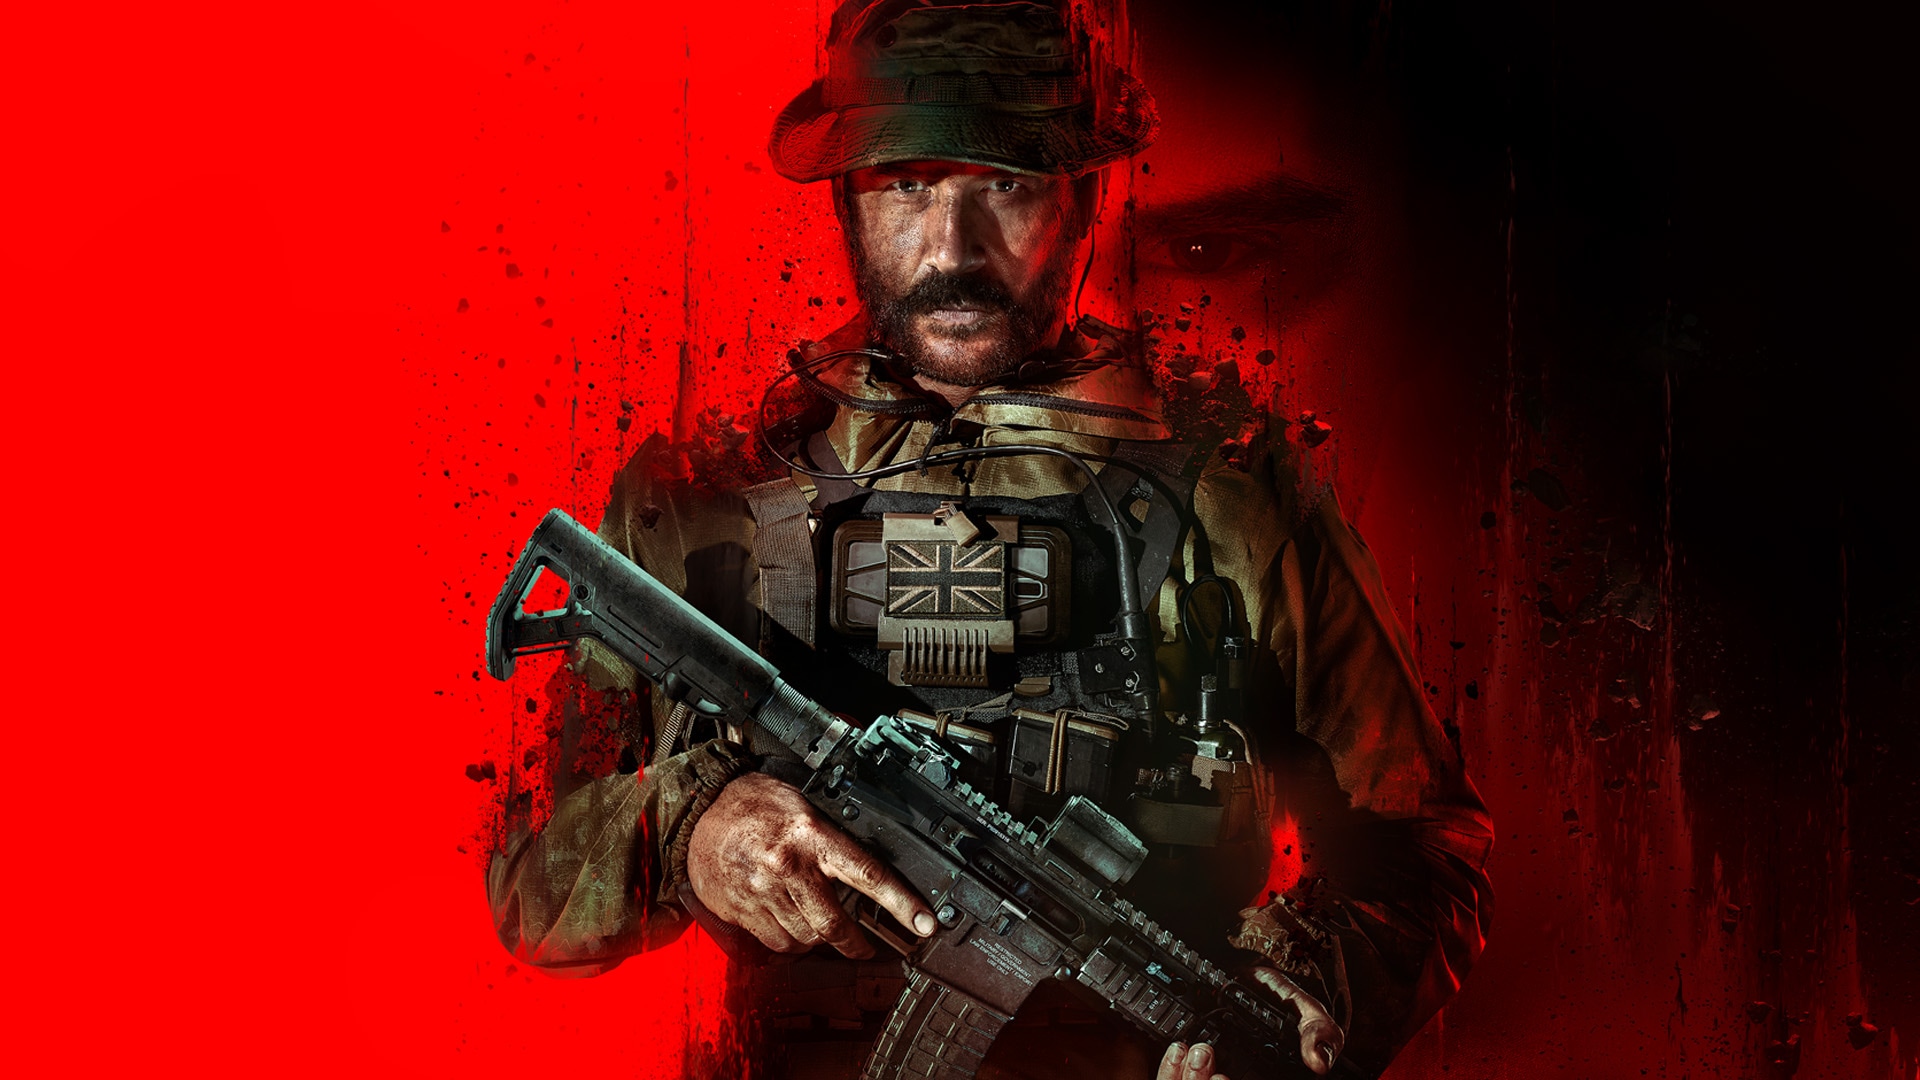 Call of Duty®: Warzone™ Mobile on the App Store